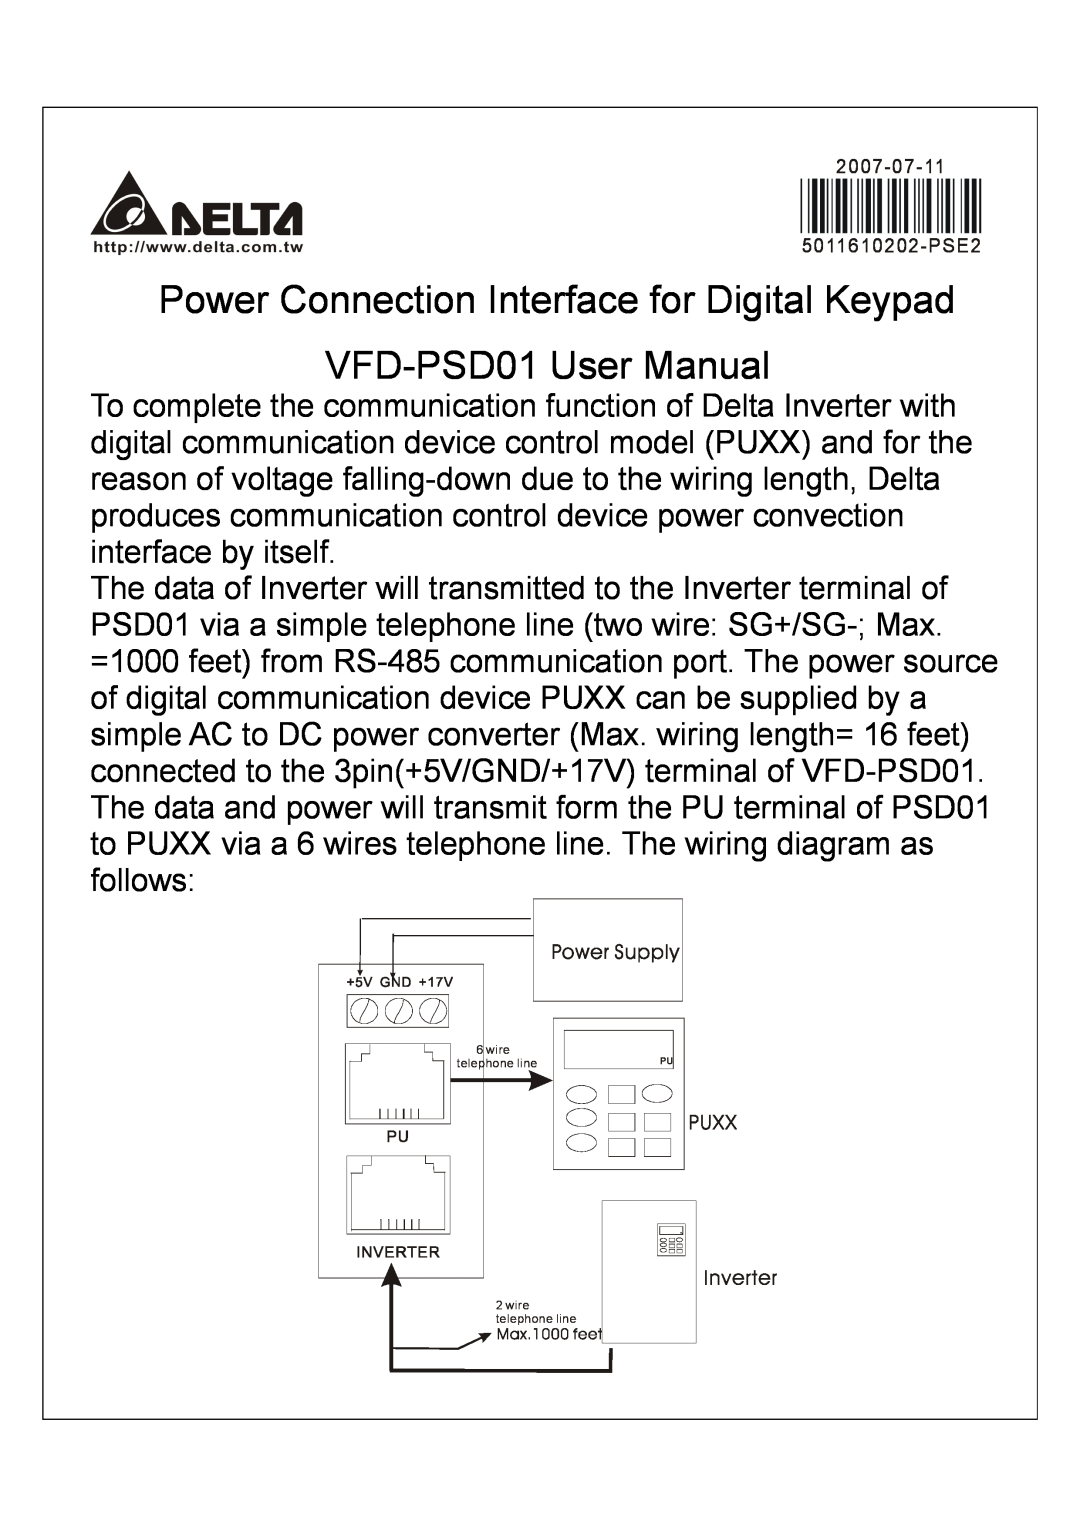 Delta Electronics user manual Power Connection Interface for Digital Keypad VFD-PSD01 User Manual 